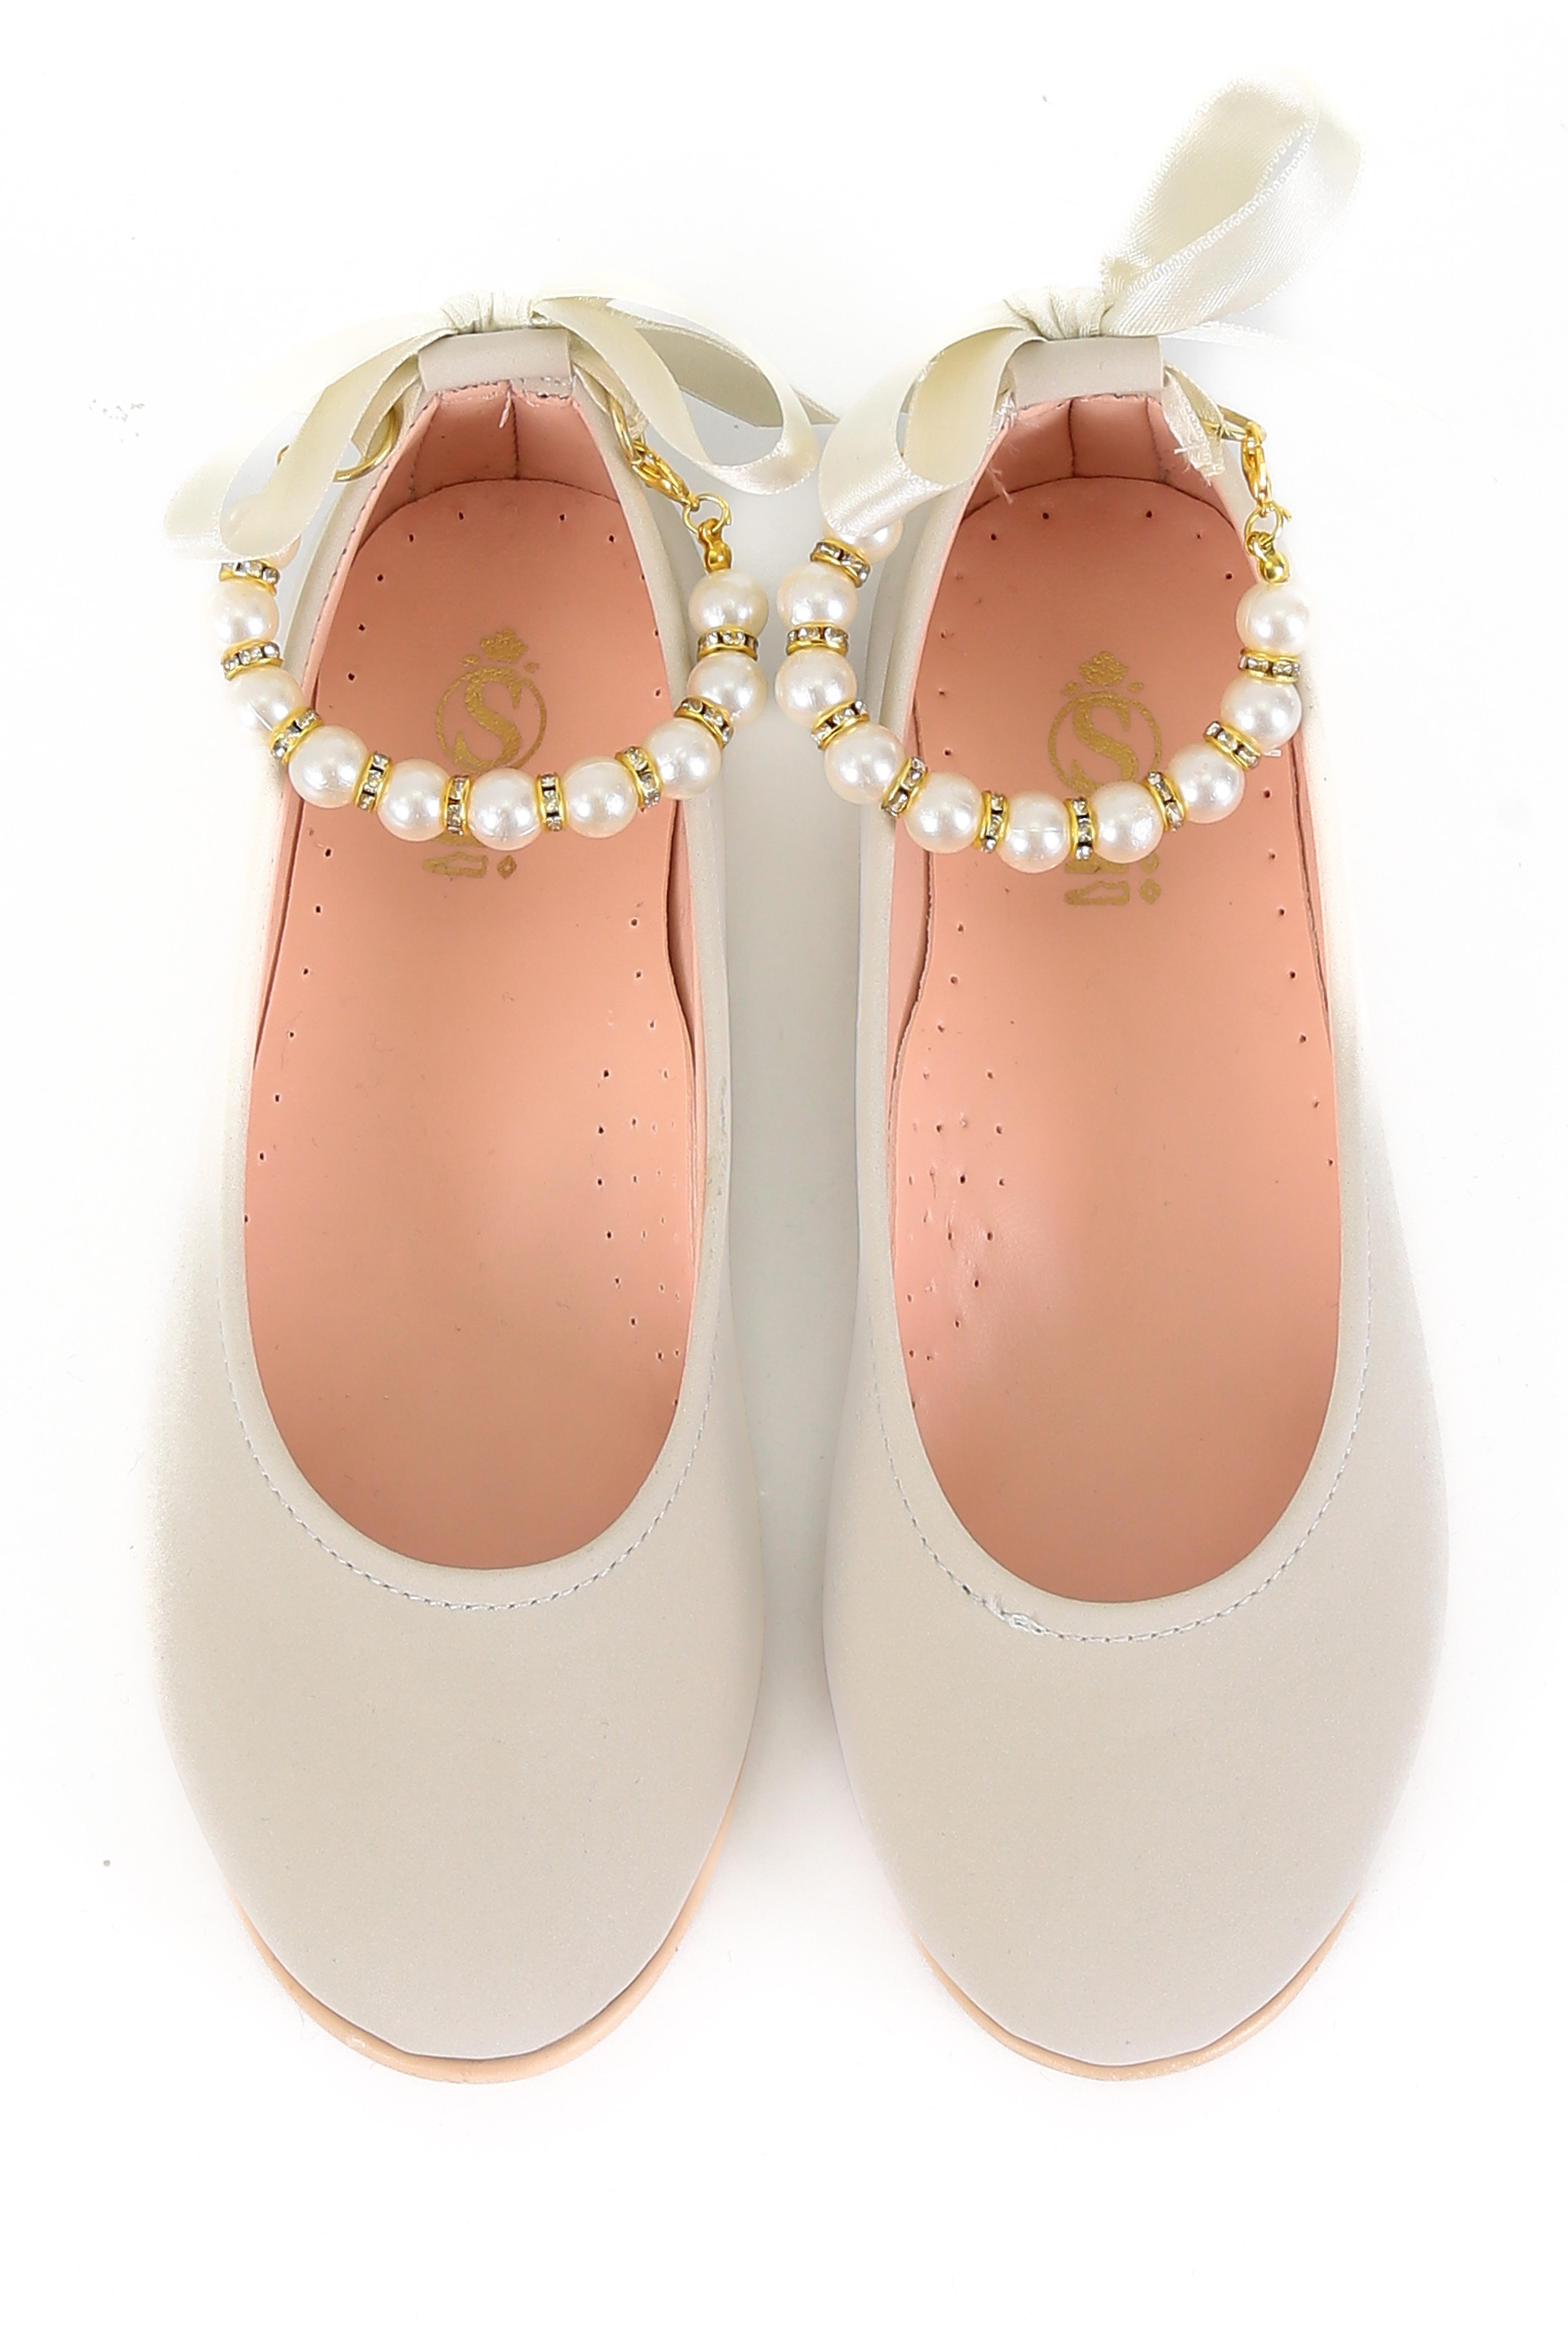 Girls Pearls Flat Mary Jane Shoes - ISABEL - Beige